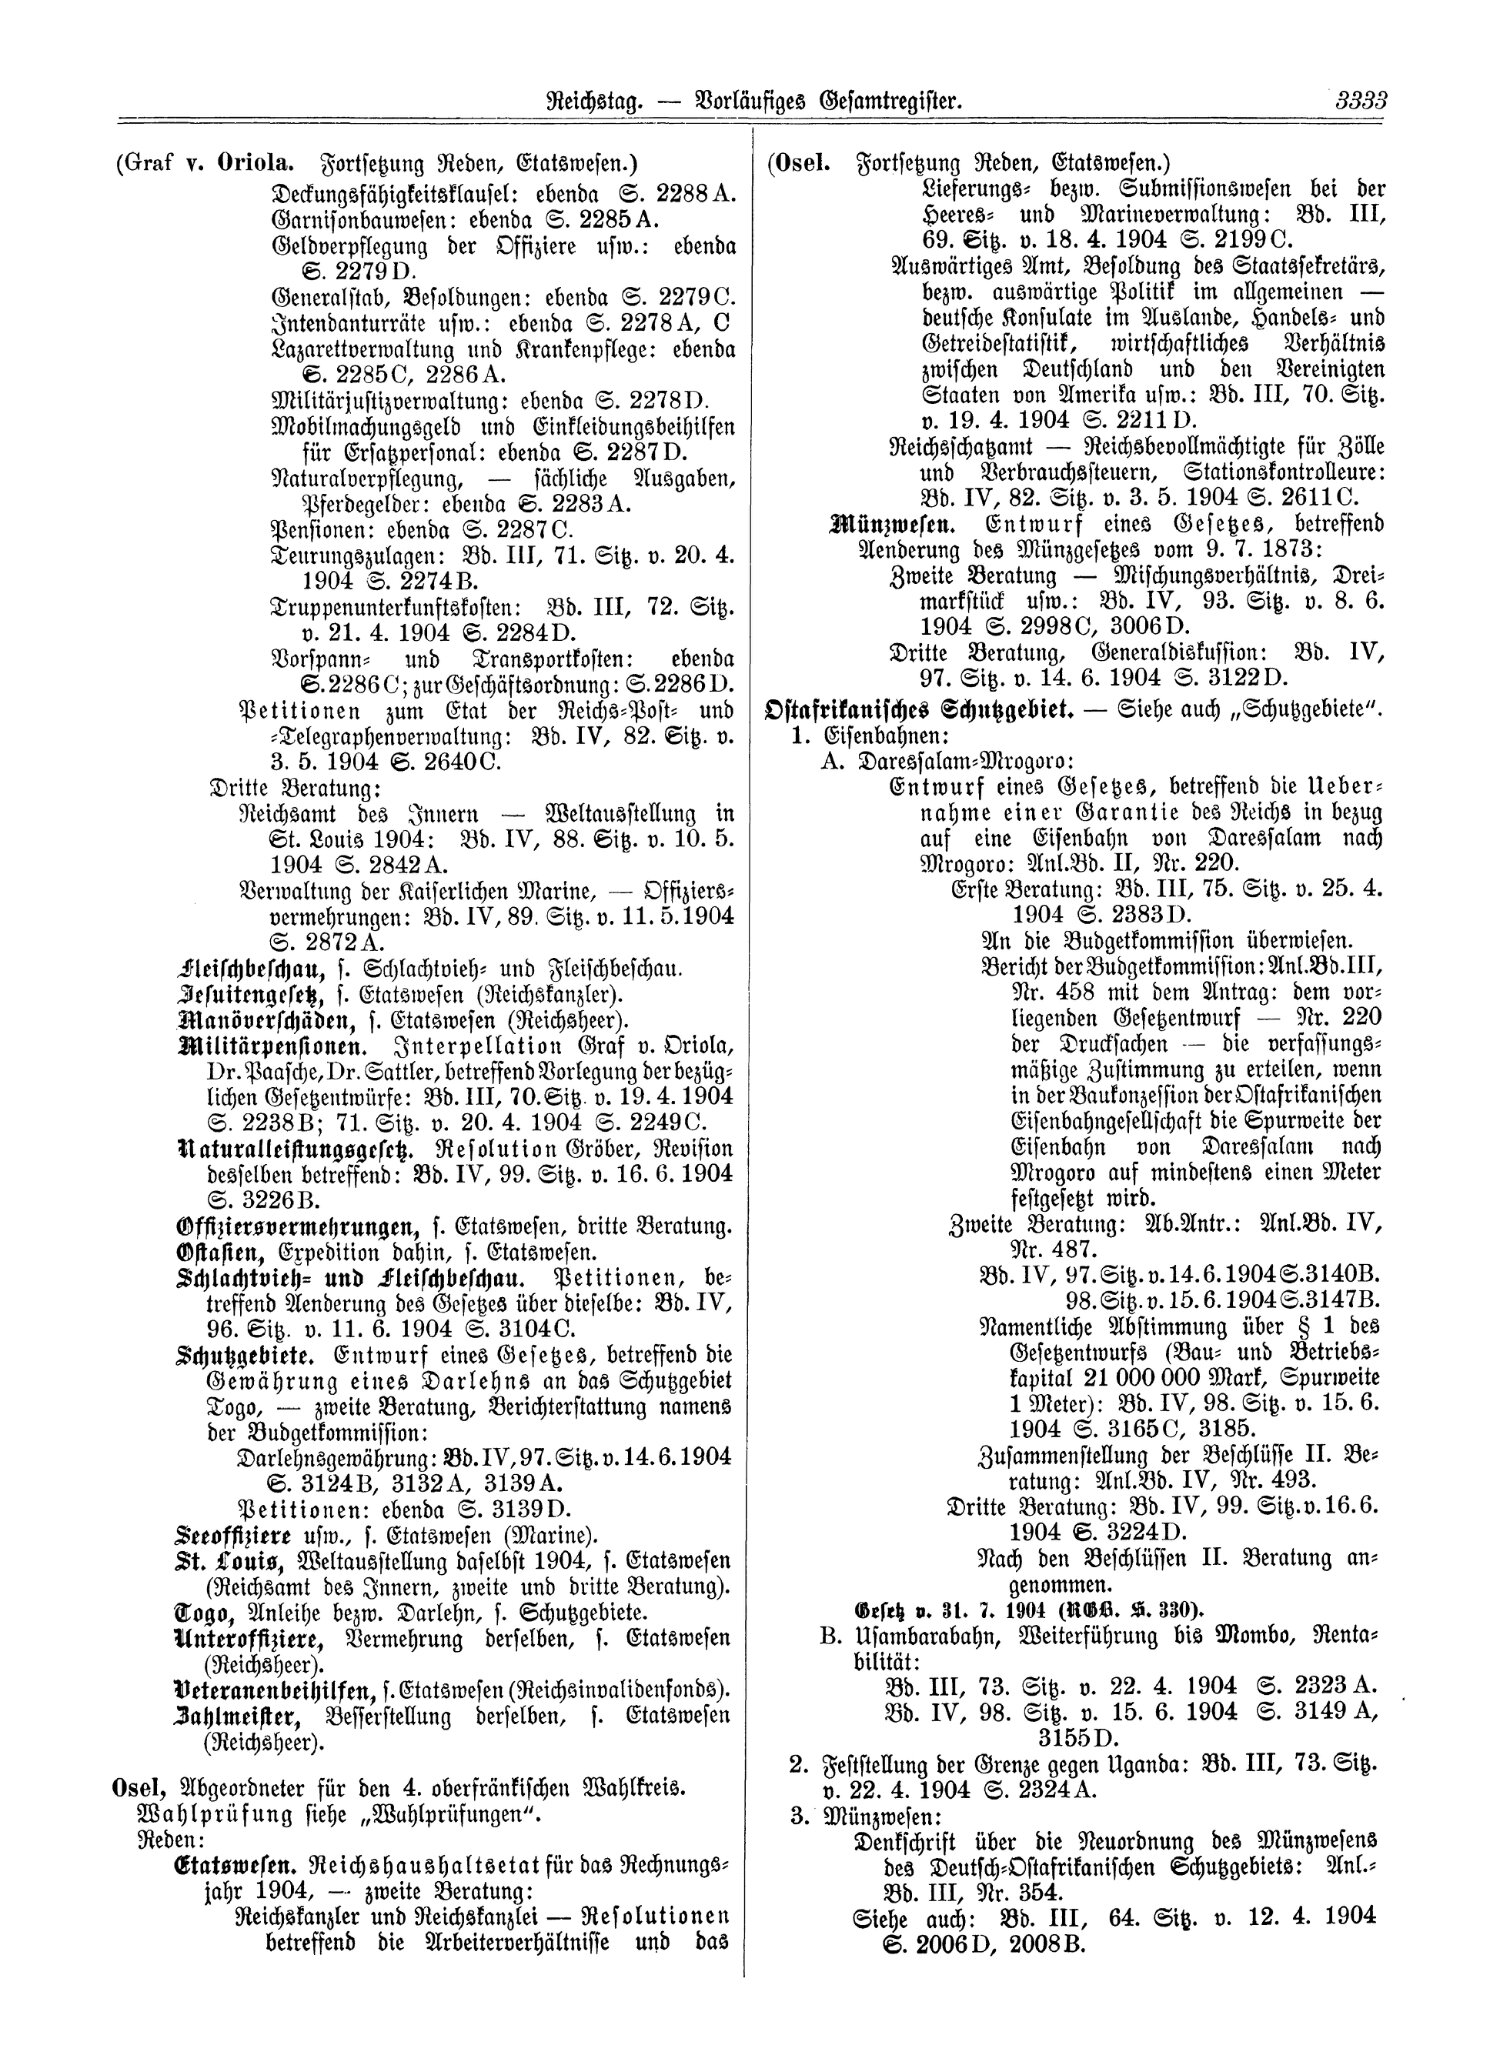 Scan of page 3333